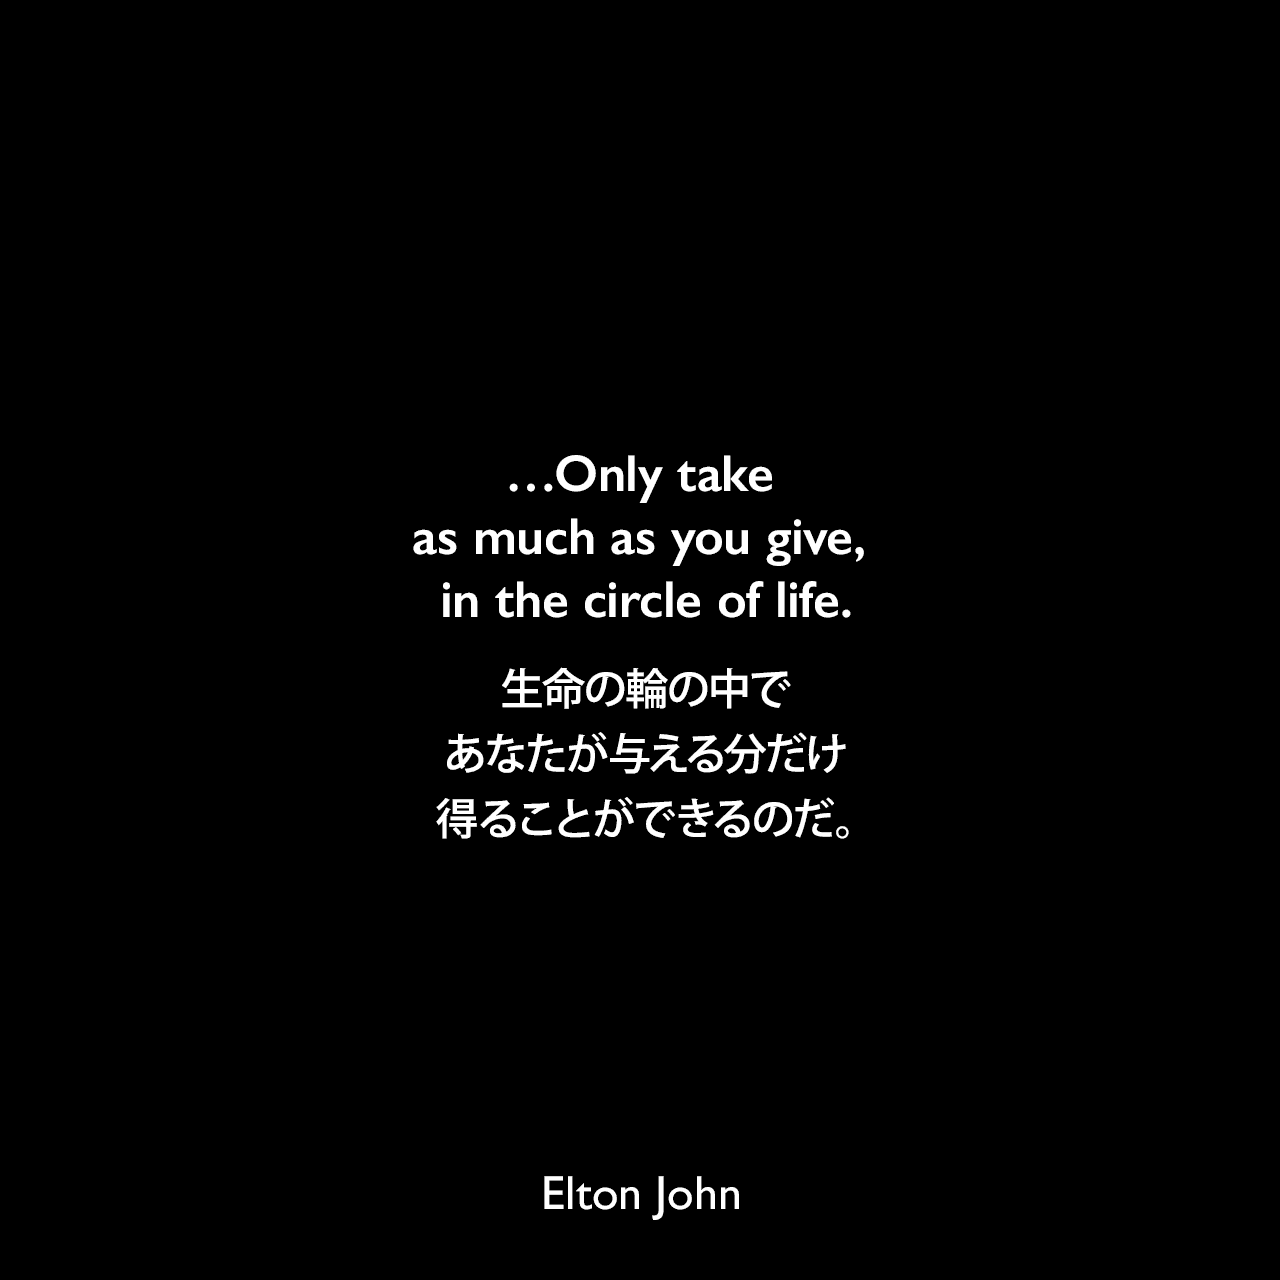 …Only take as much as you give, in the circle of life.生命の輪の中で、あなたが与える分だけ得ることができるのだ。Elton John